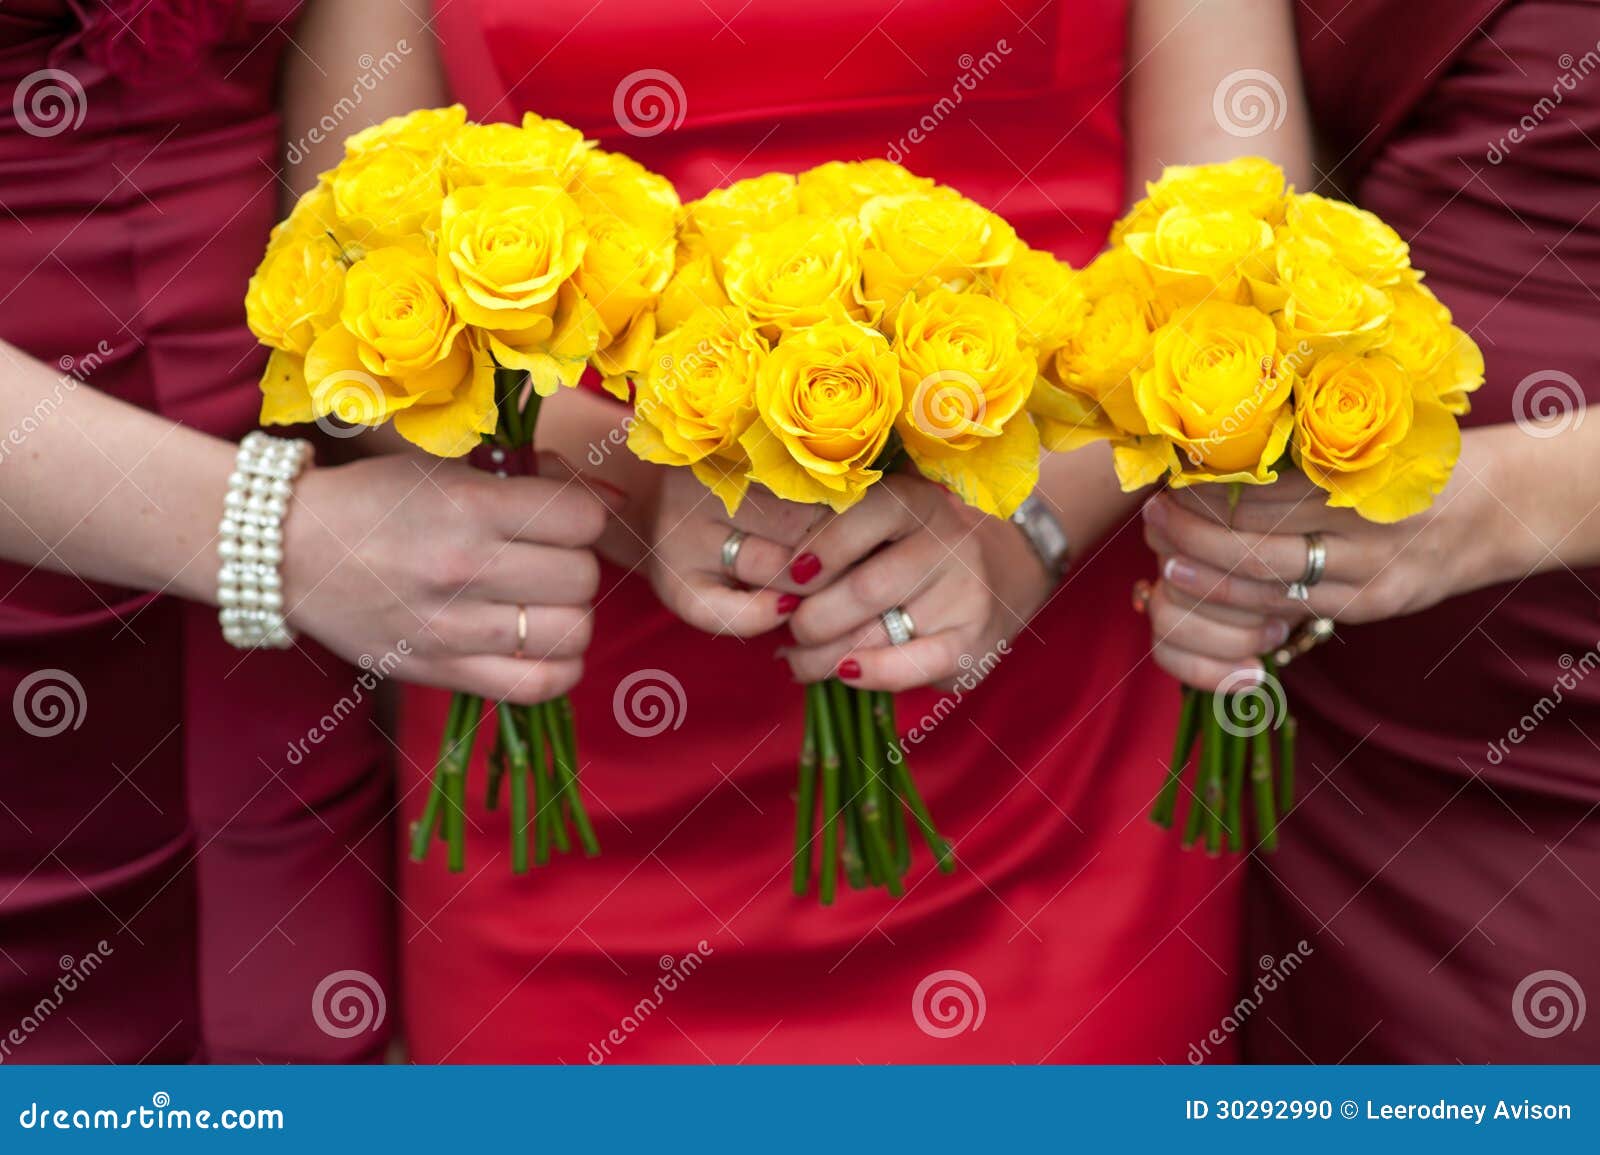 three bridesmaids holding wedding bouquets yellow roses 30292990